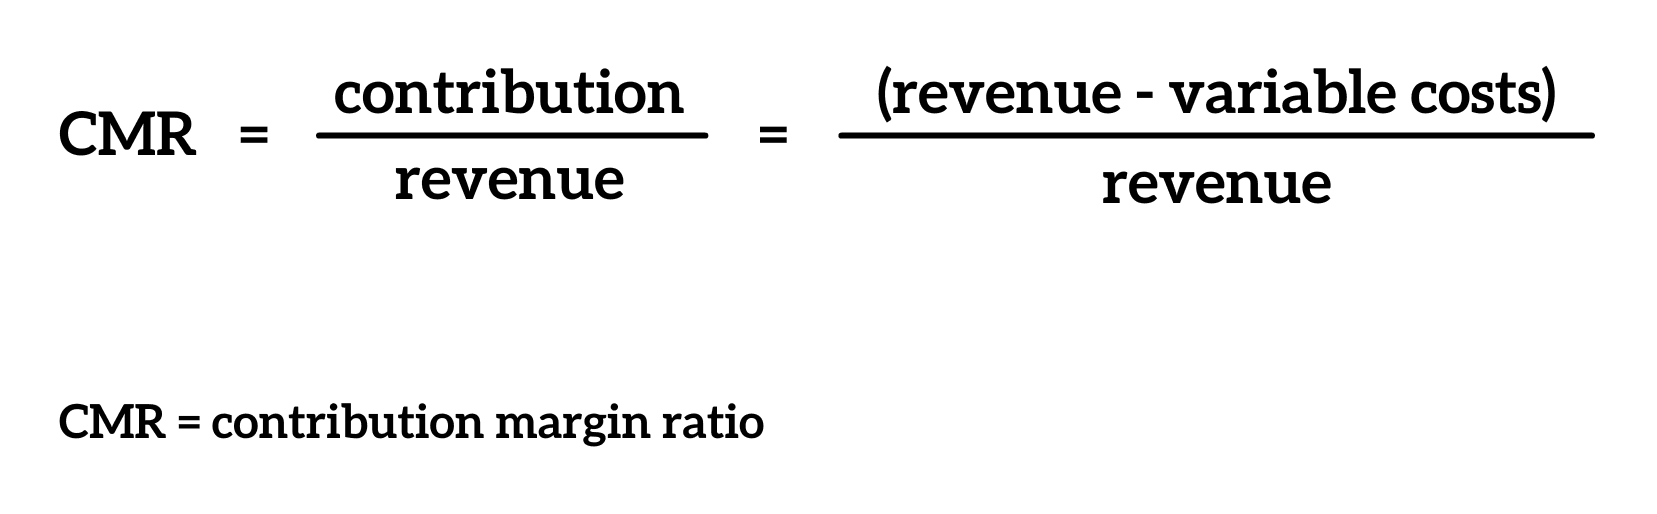 Calculation for contribution margin ratio, which is contribution divided by revenue